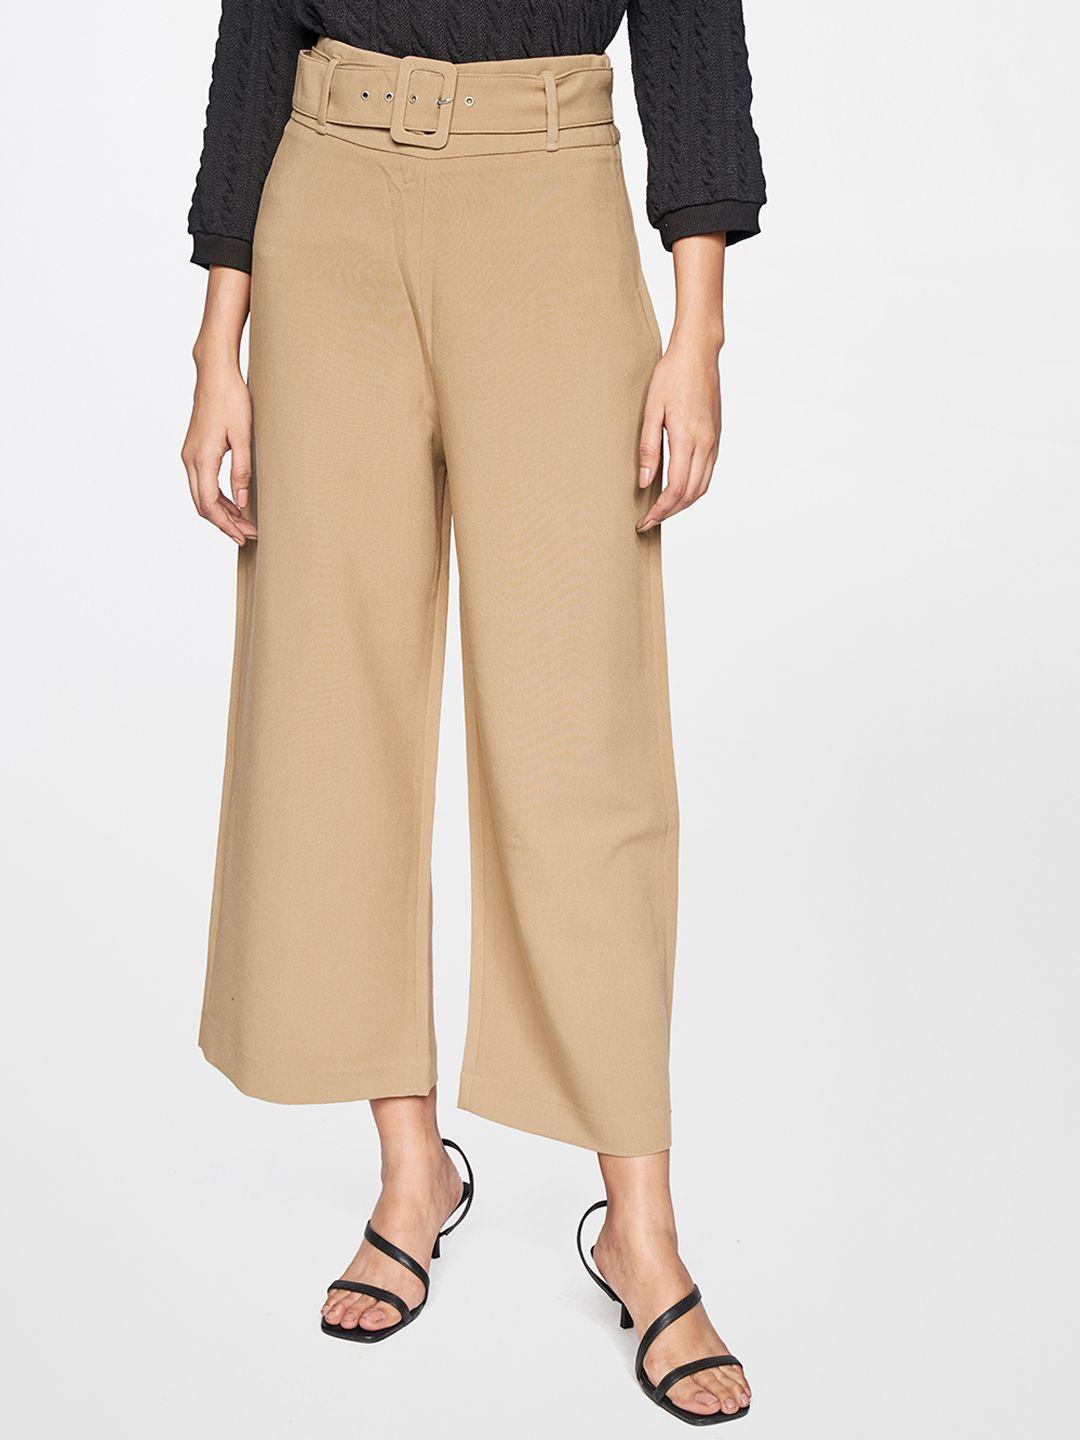 and women flared trousers with belt